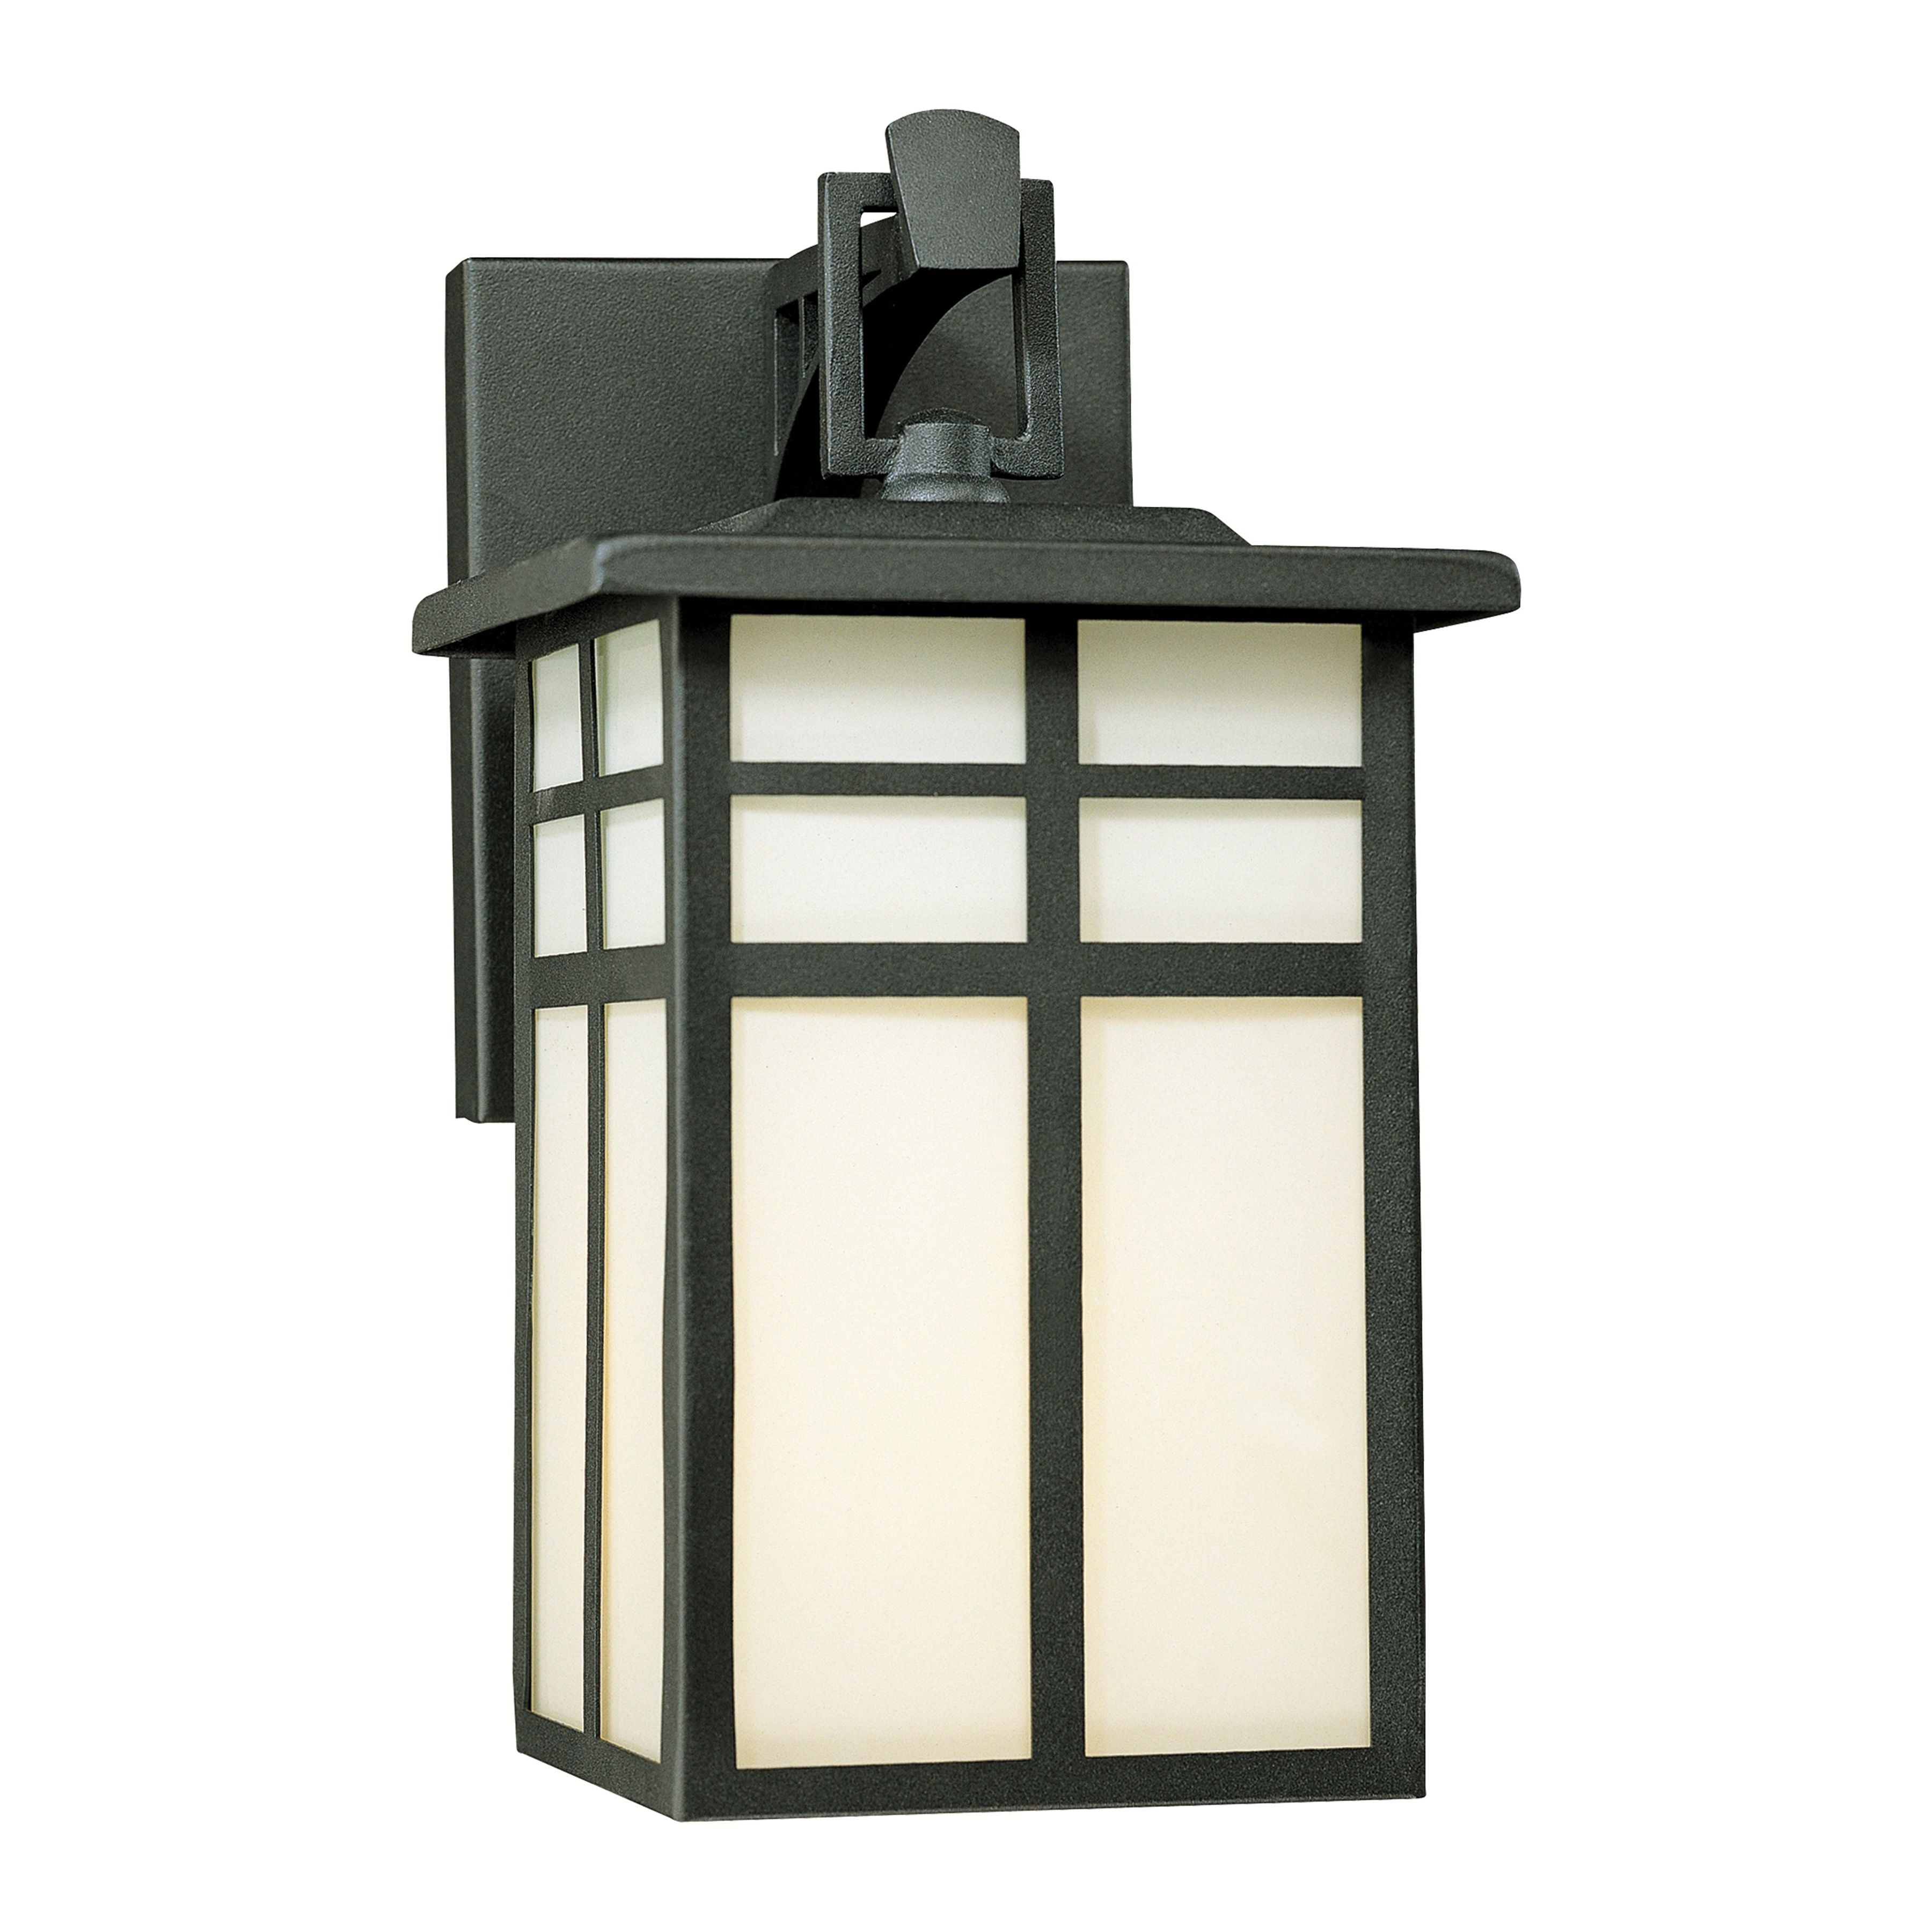 Mission 10.5" High 1-Light Outdoor Sconce